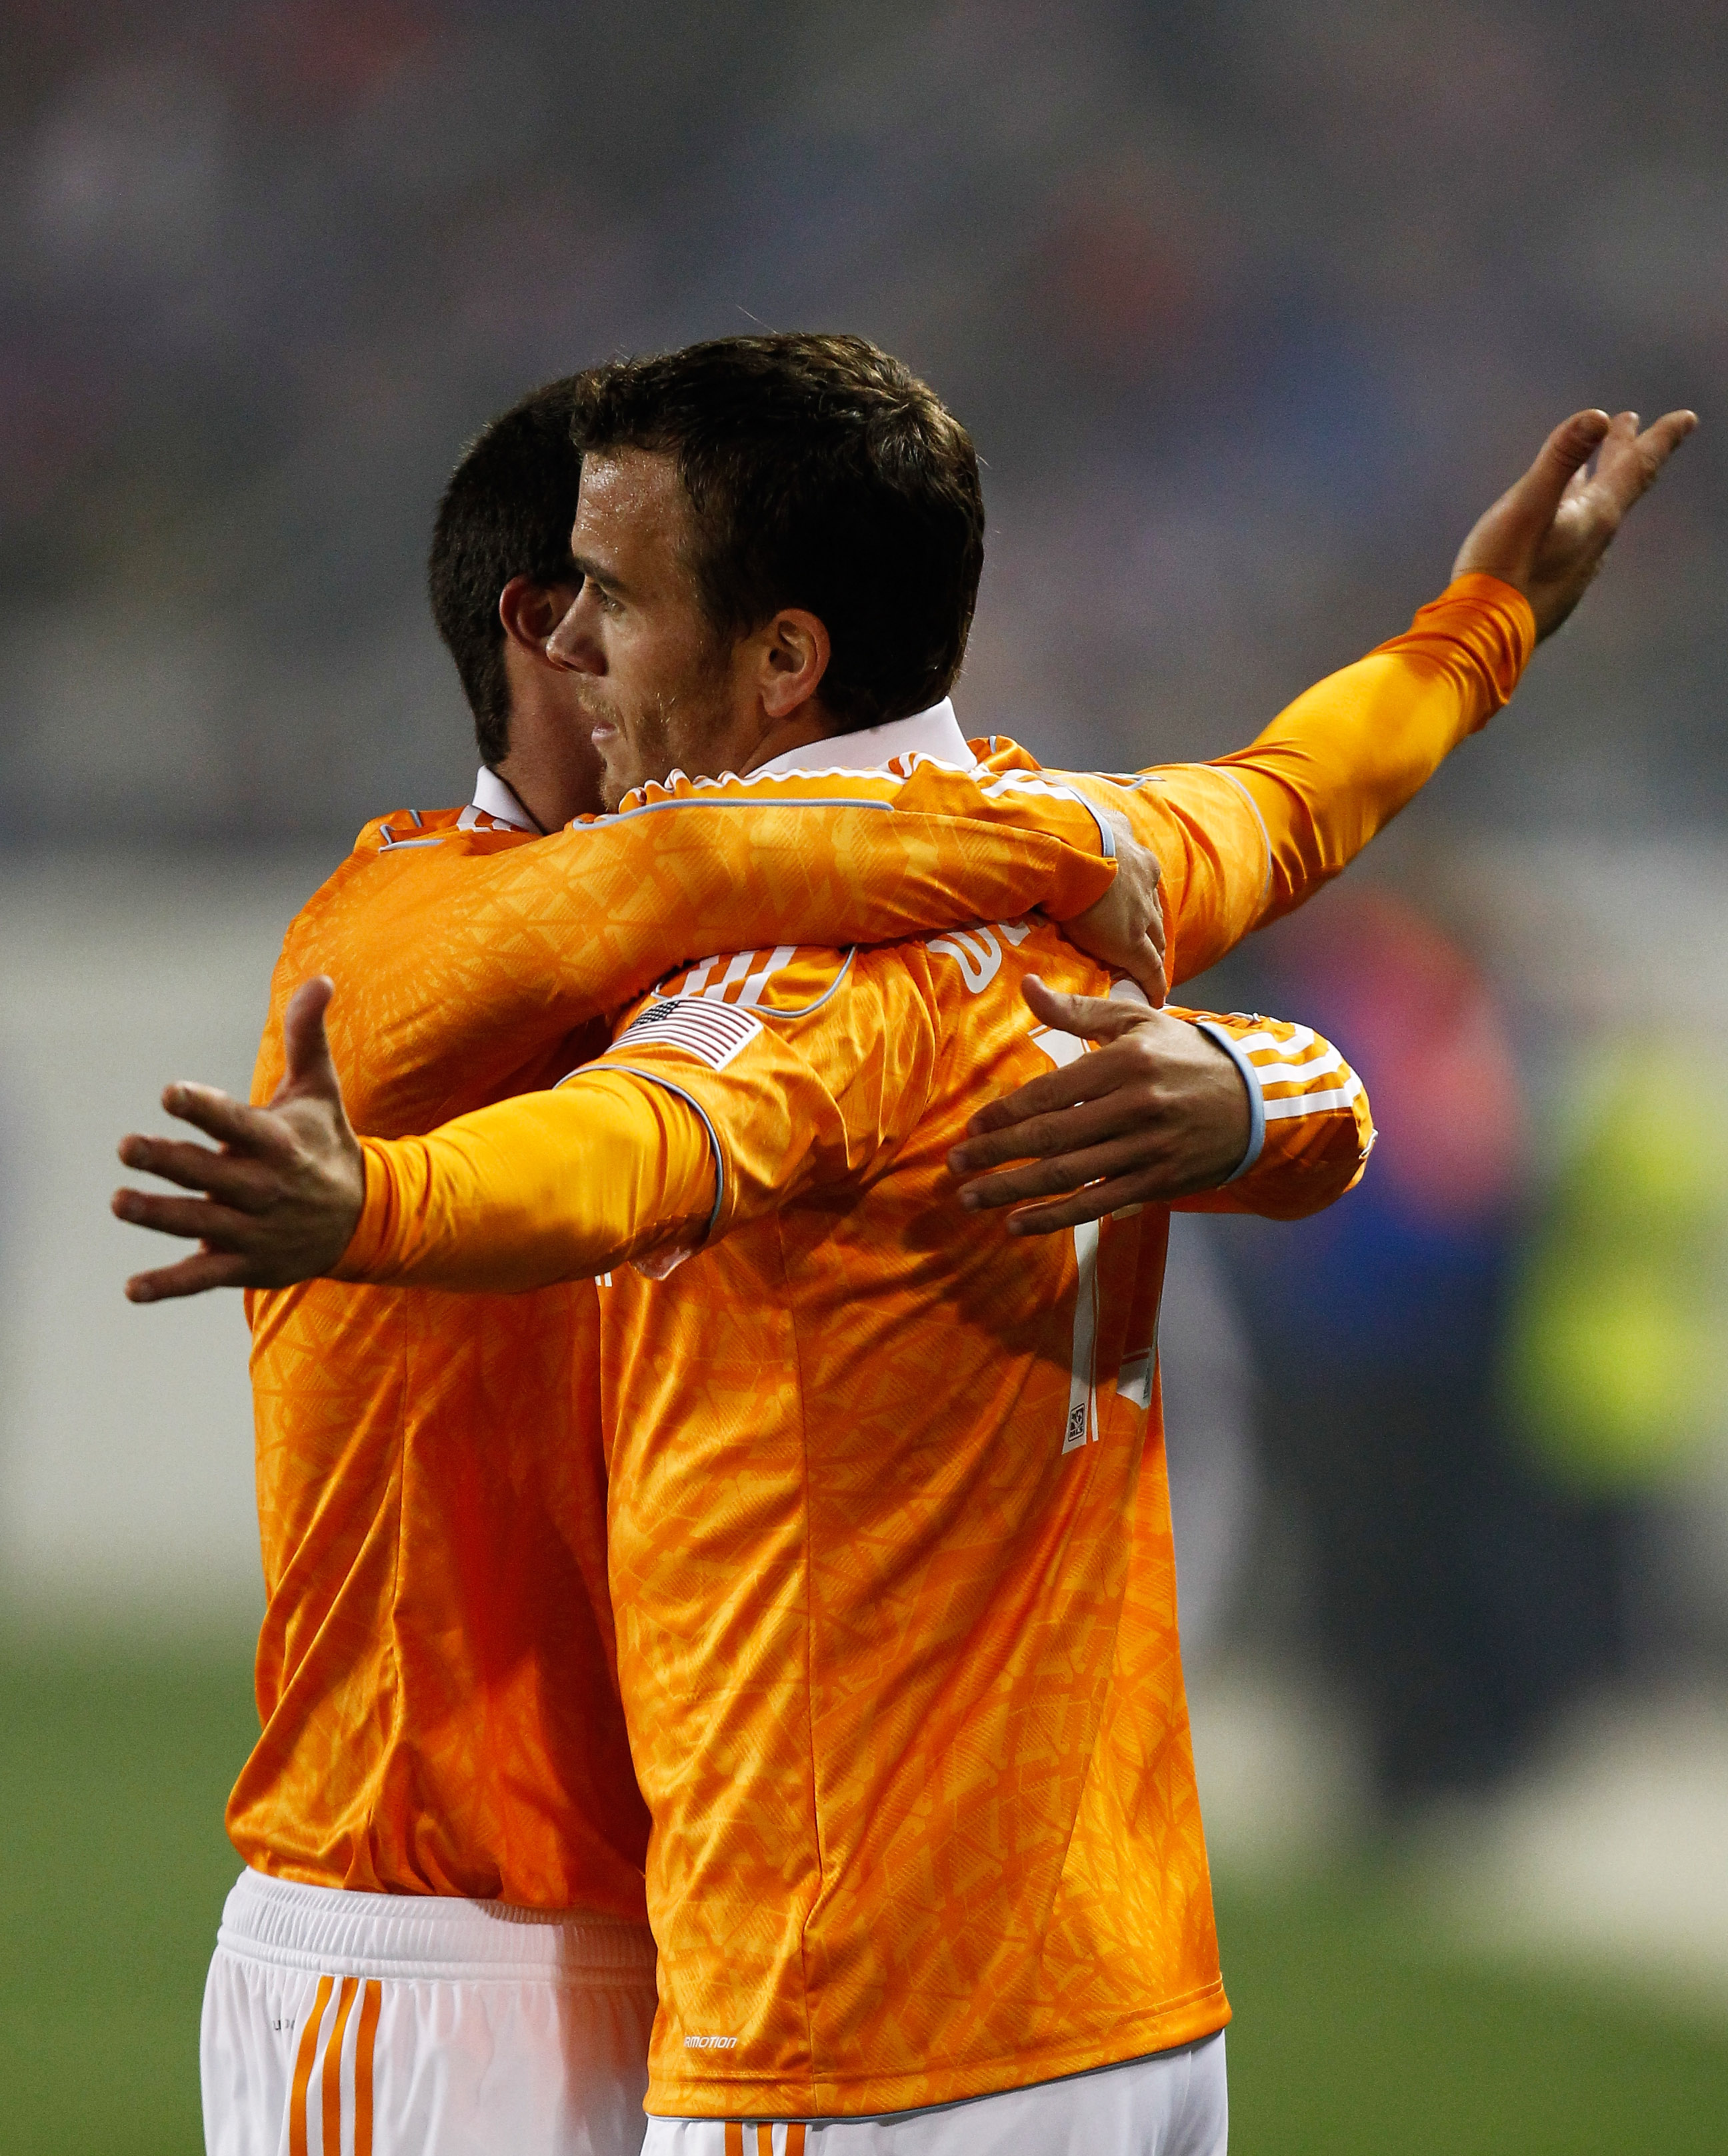 HARRISON, NJ - APRIL 02:  Cameron Weaver #15 of the Houston Dynamo celebrates his game-tying goal in the second half against the New York Red Bulls at Red Bull Arena on April 2, 2011 in Harrison, New Jersey.  (Photo by Jeff Zelevansky/Getty Images)